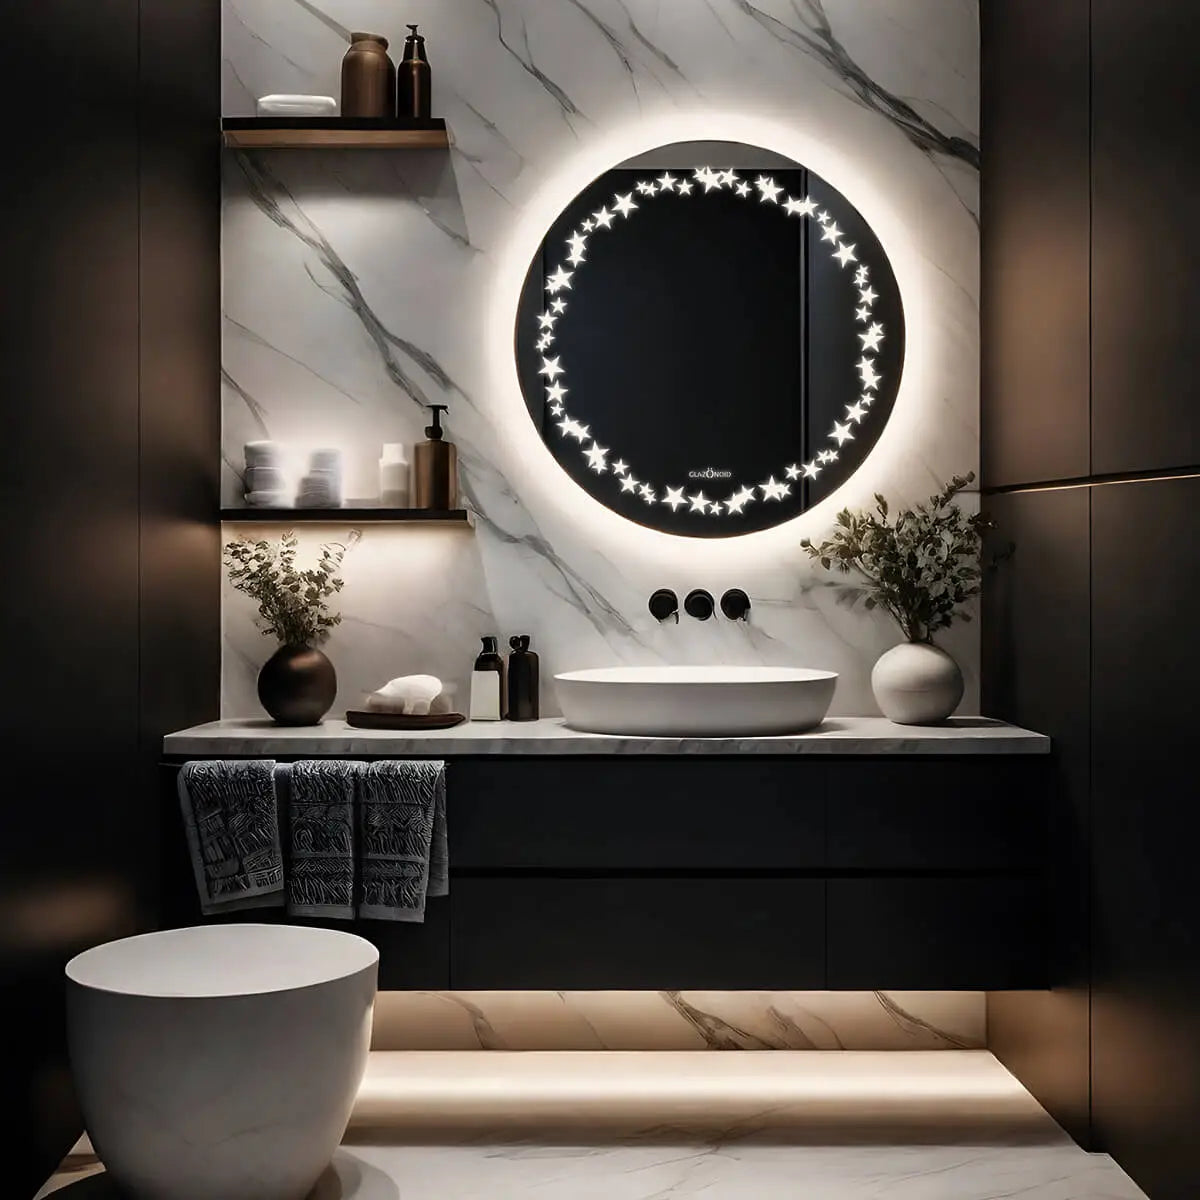 A whimsical bathroom with a round mirror decorated with LED stars in a circle, a white ceramic sink and a toilet. Great for a classic bathroom design.